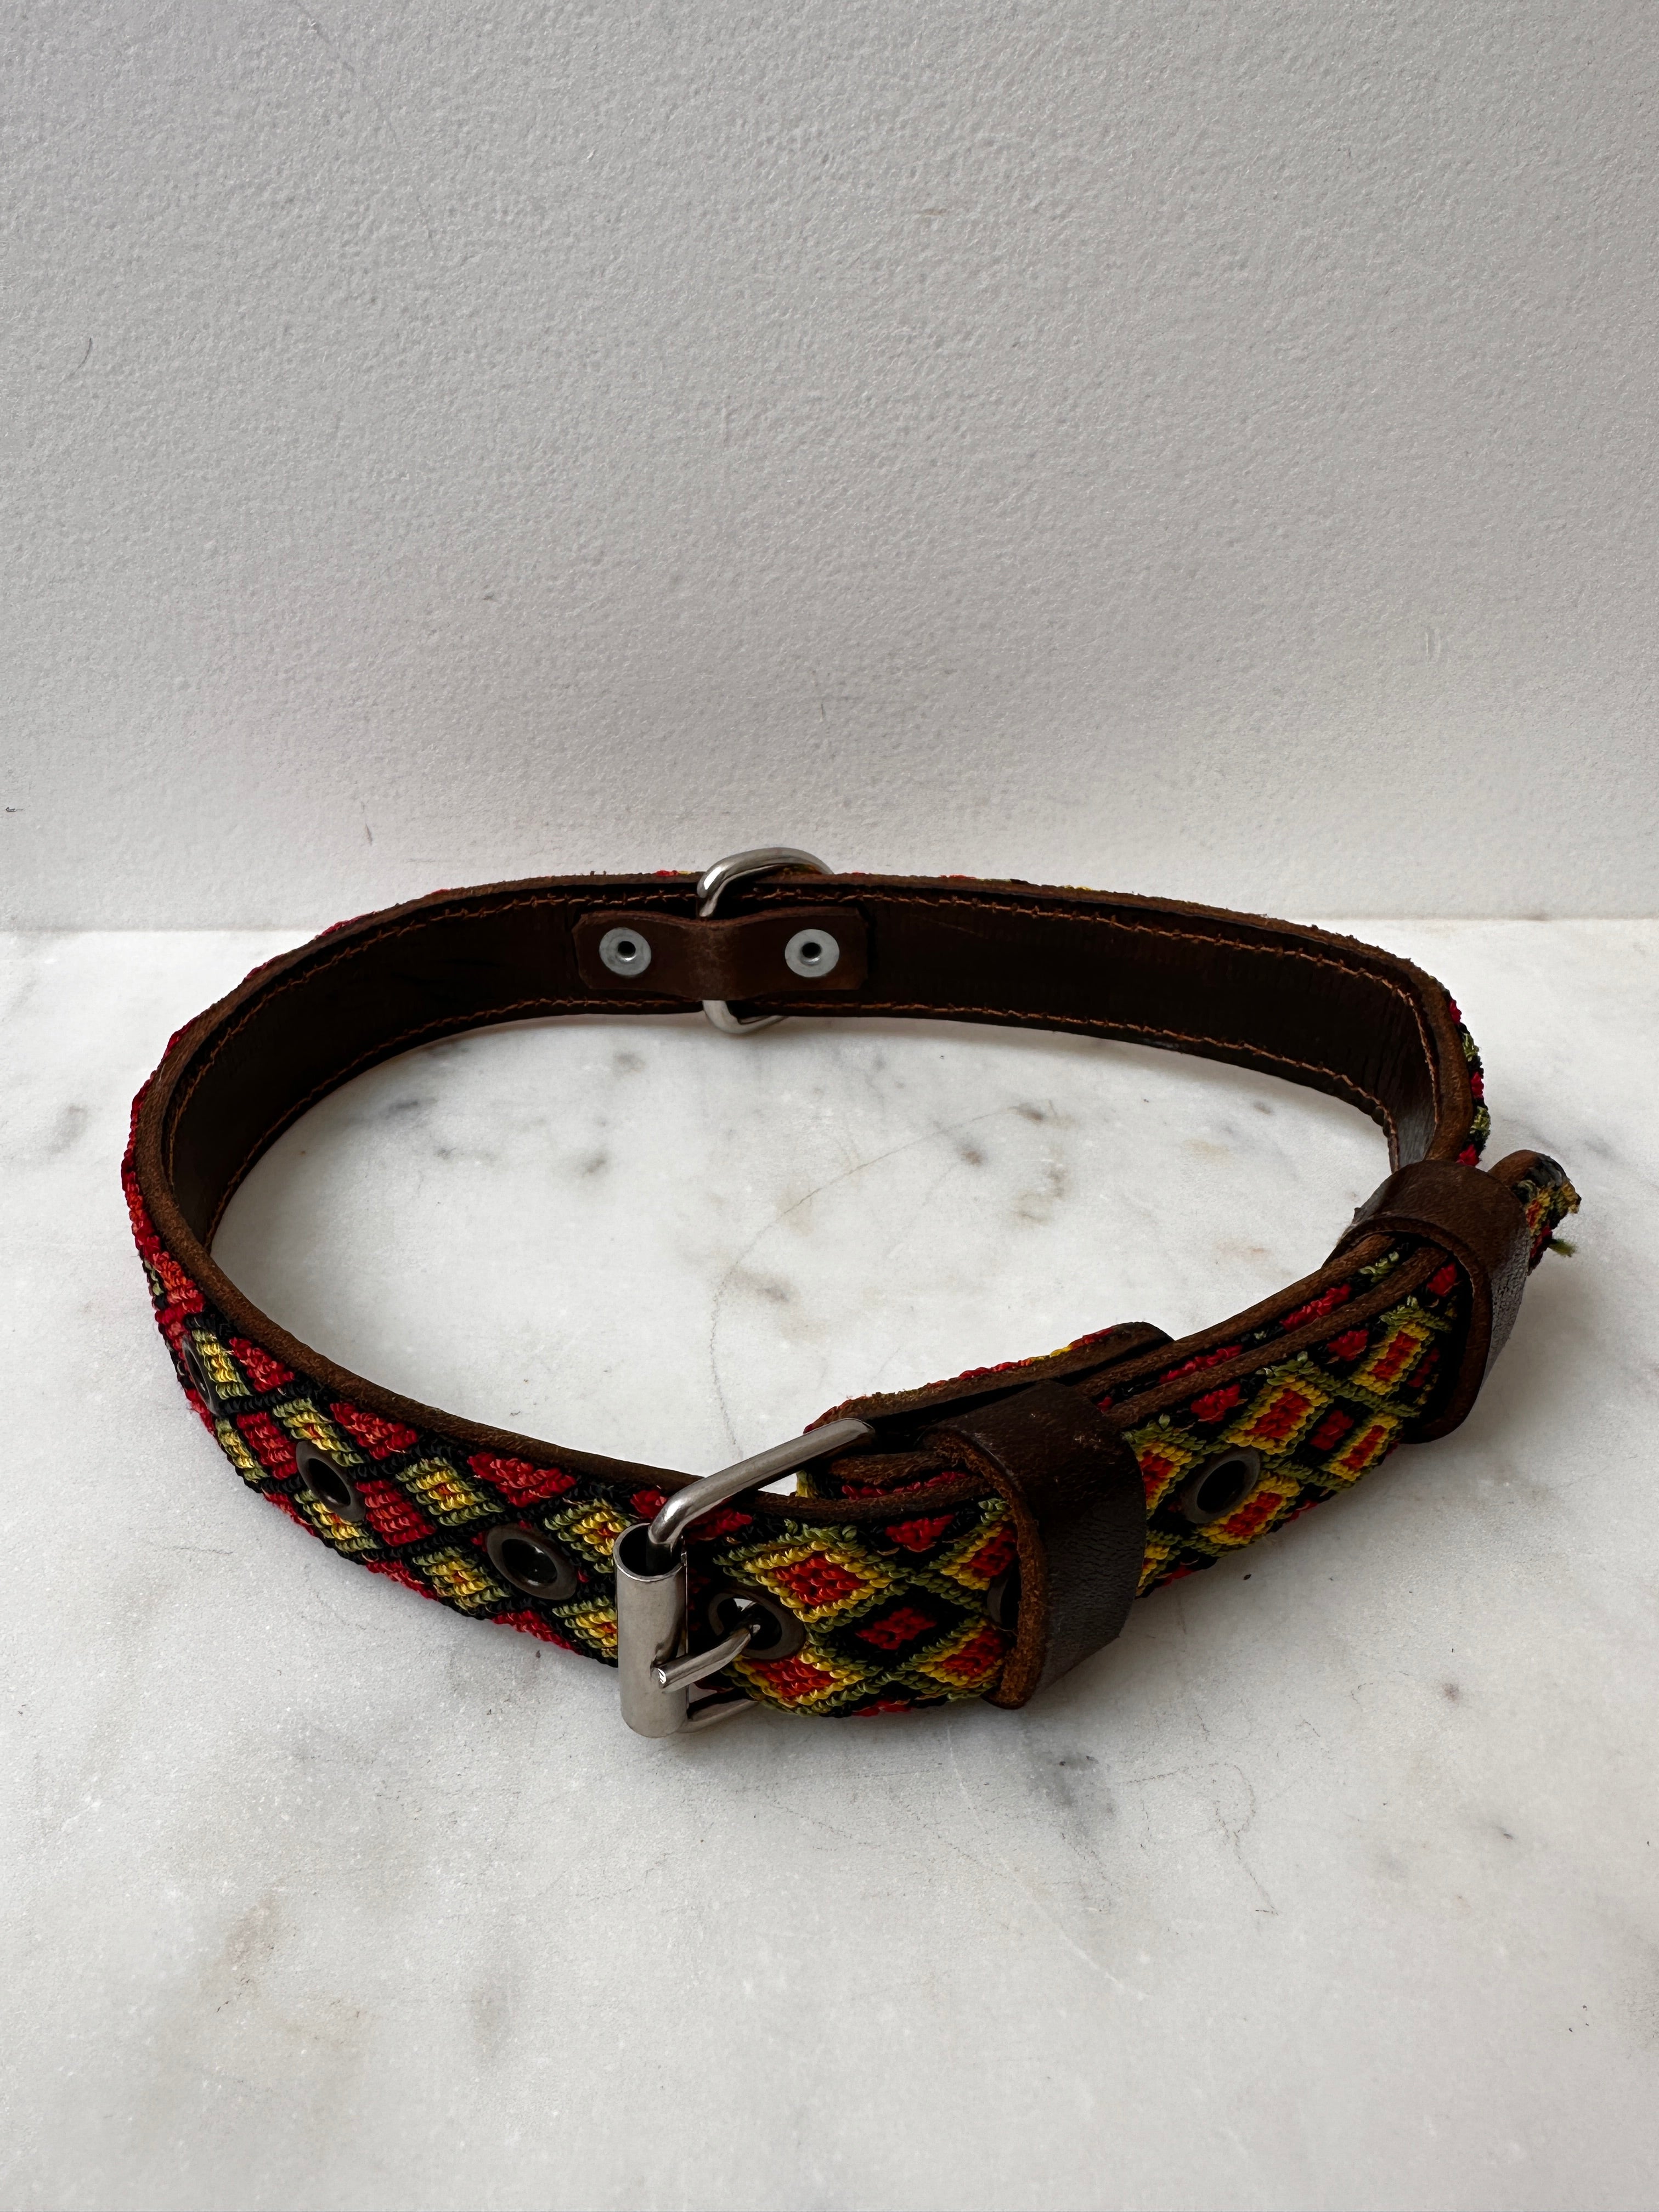 Future Nomads Homewares One Size Huichol Fully Embroidered Dog Collar L7